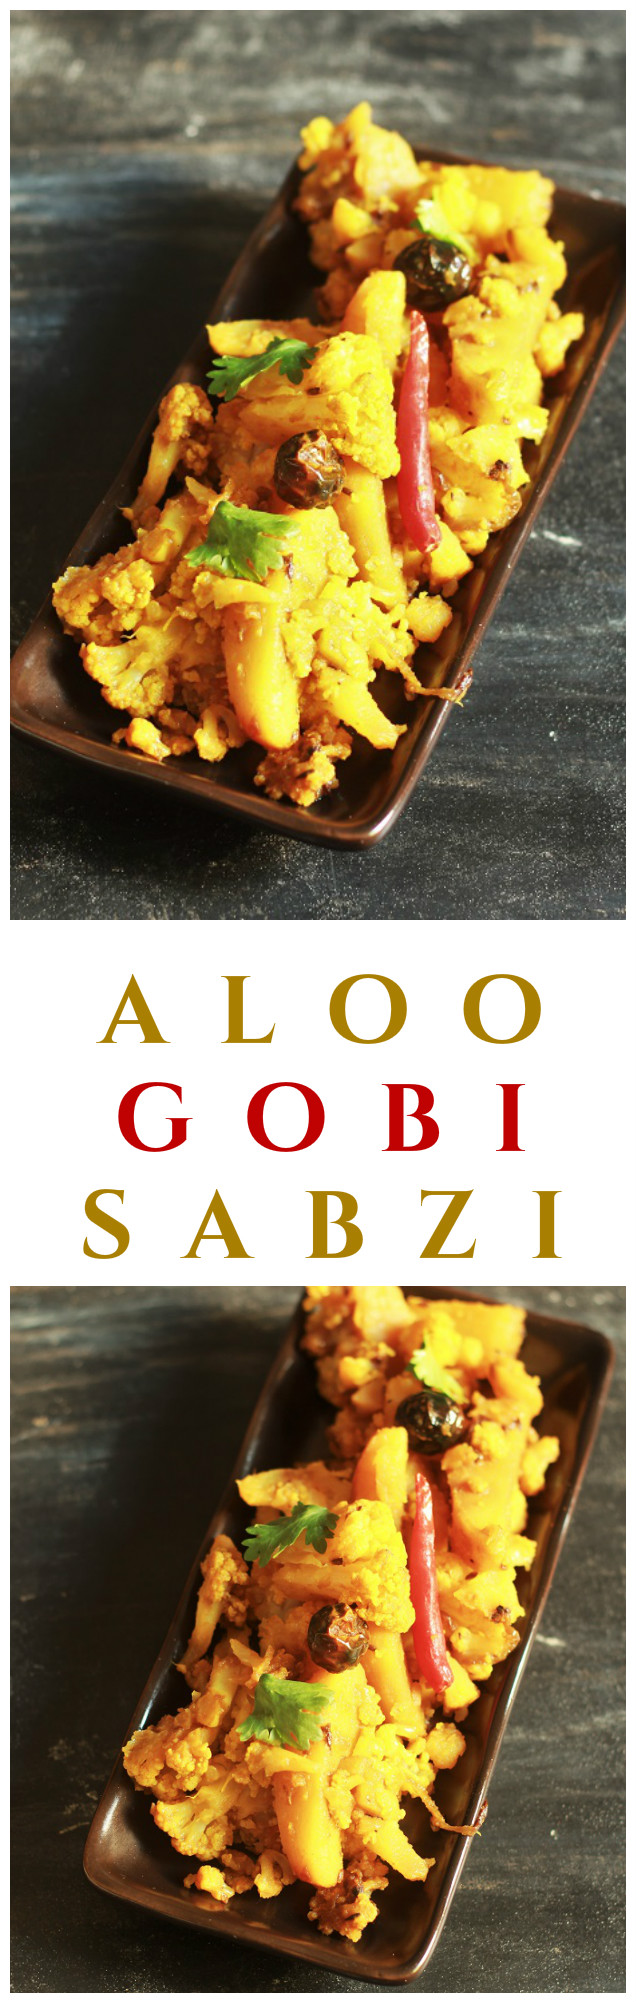 Aloo Gobi Recipe-How to make Dry Aloo Gobi-The aloo gobi recipe is nothing but a dry sabzi made with potato and cauliflower. It is very simple, easy and fast to make and everyone will love it from kids to adults #indianrecipes #aloogobi #halalrecipes #dryaloogobi